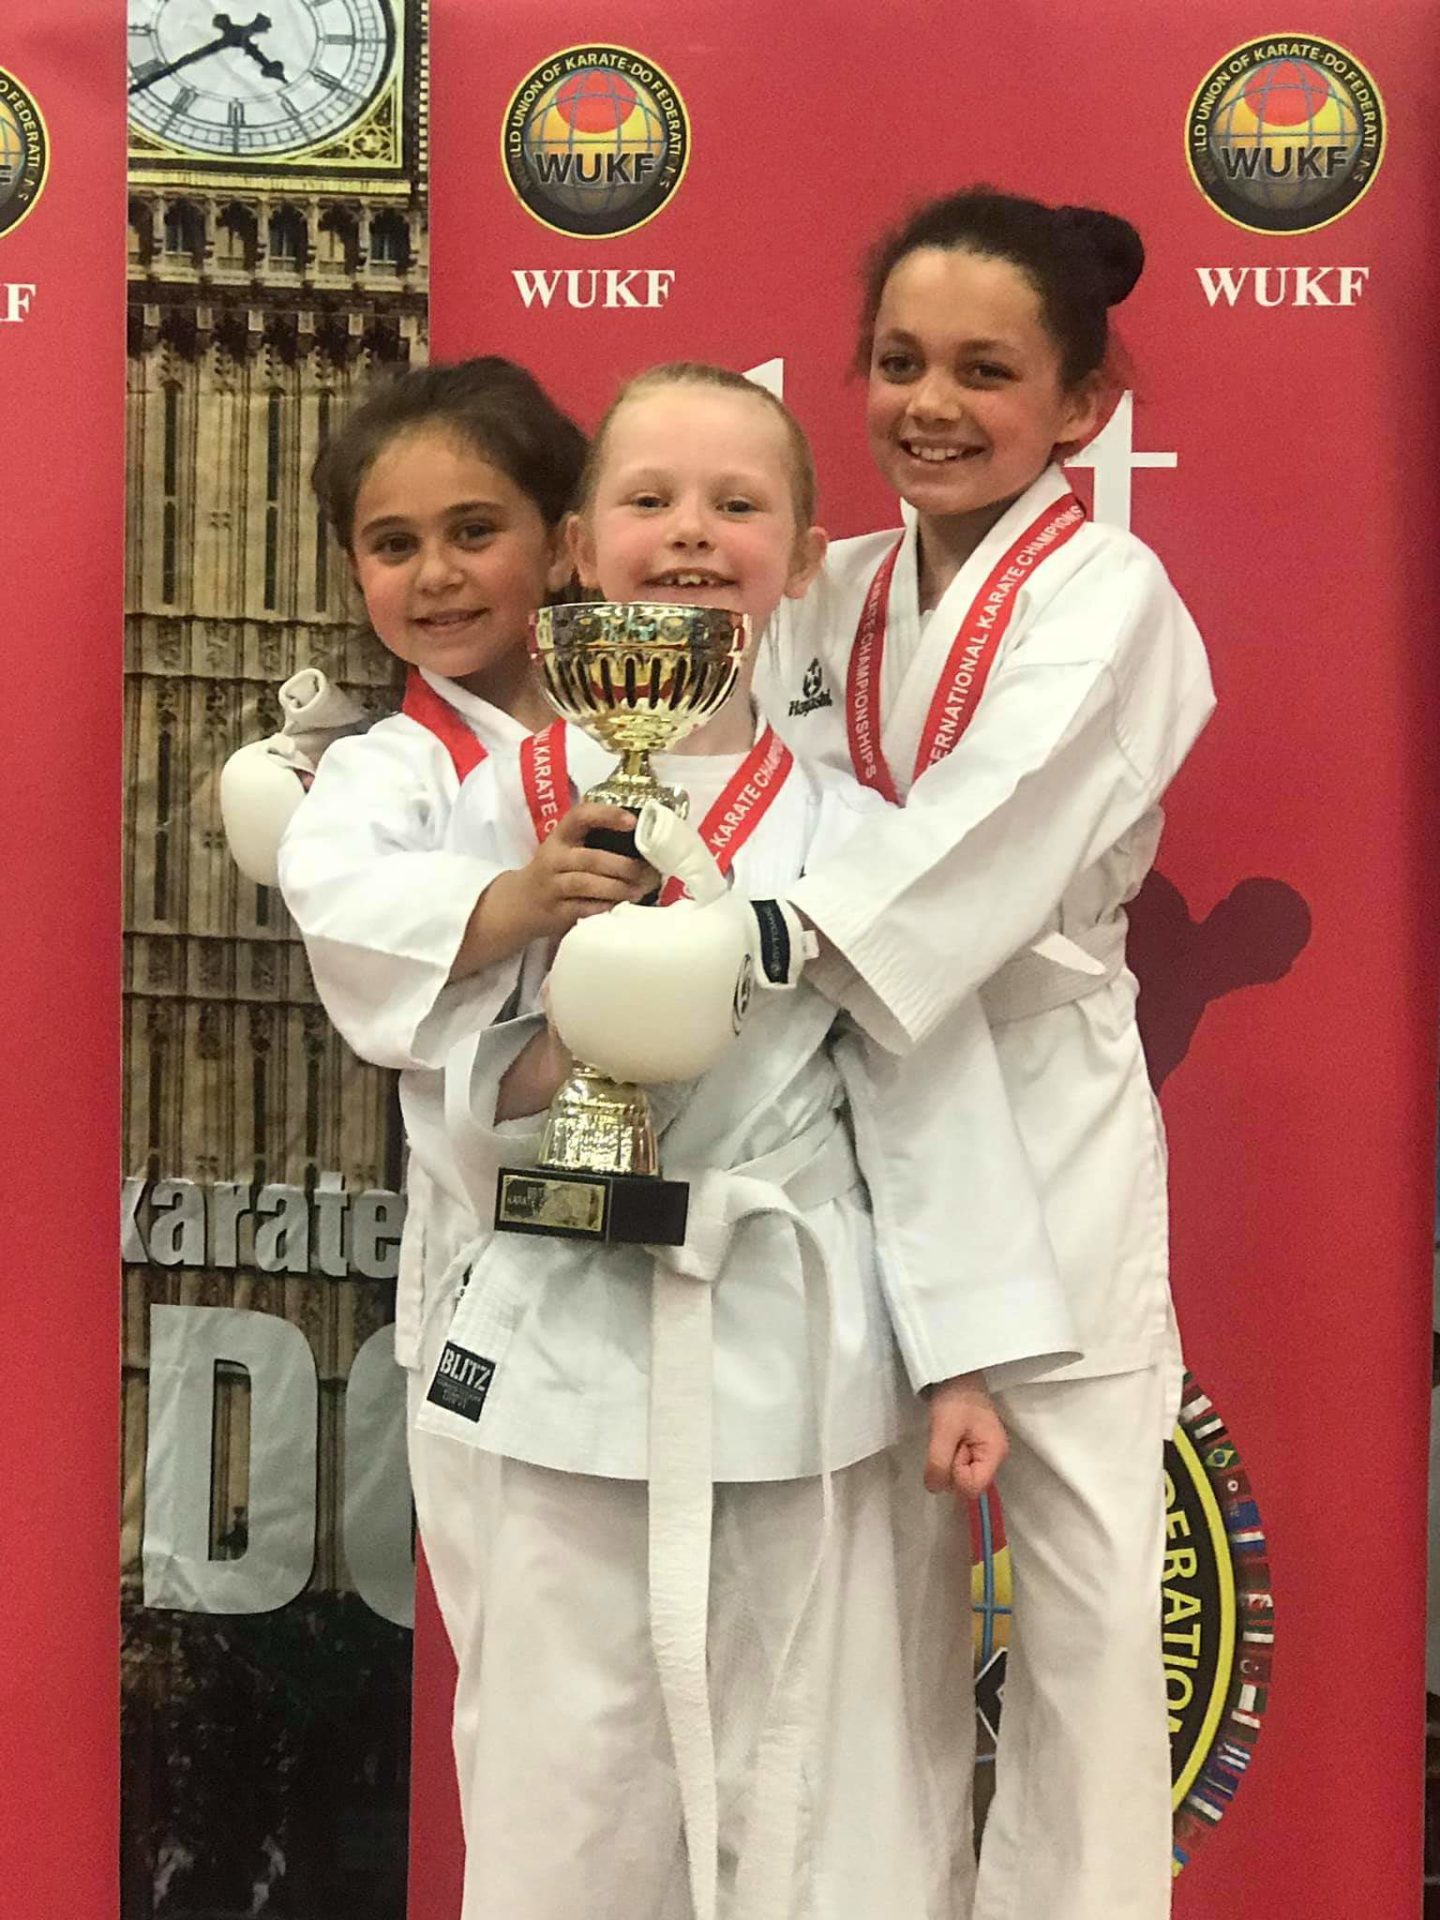 Photo of Karate girls from Basingstoke with medals